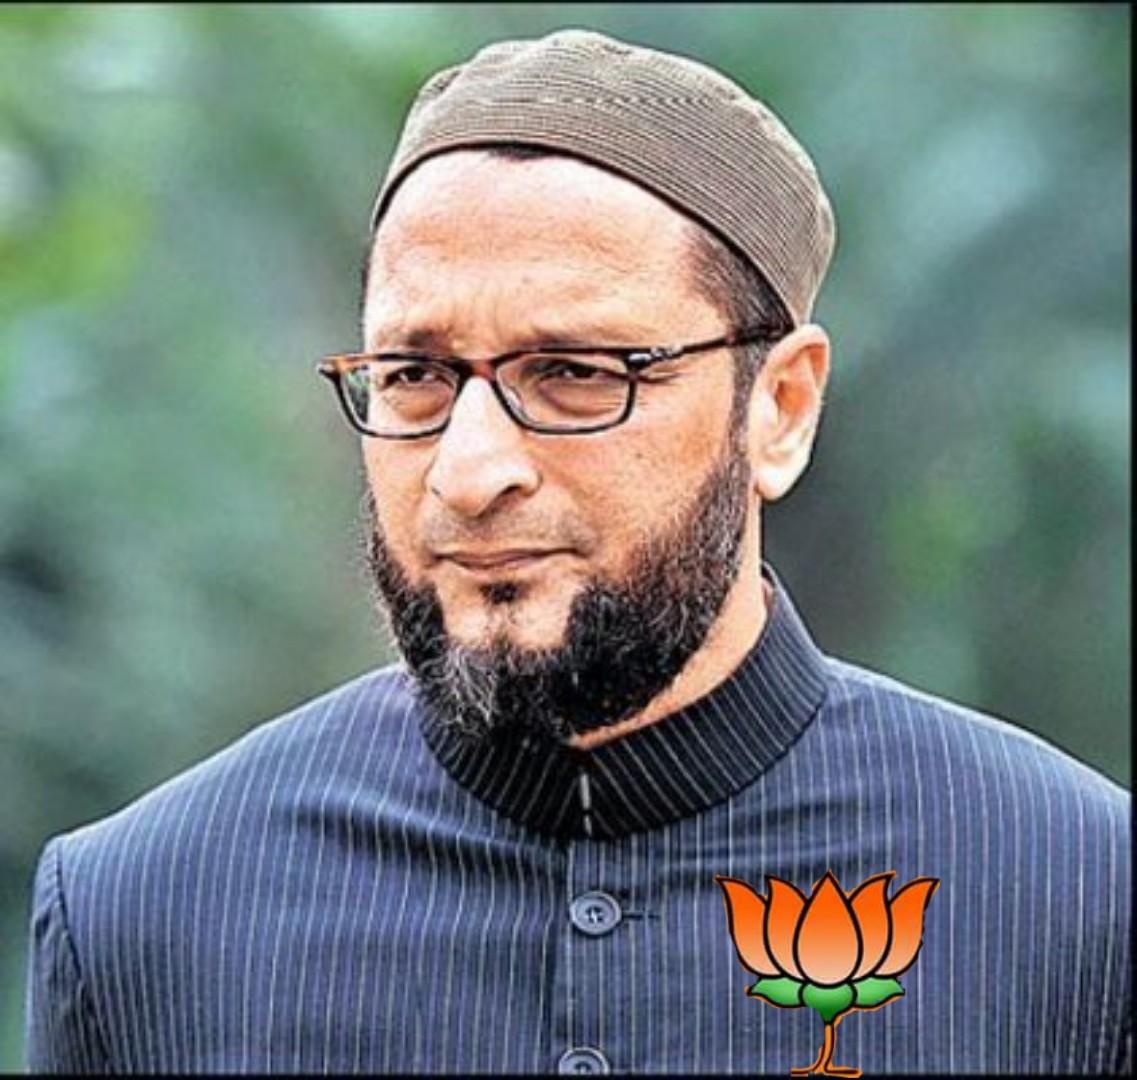 #भाग्यनगर_मे_भगवाधारी
BJP 4 to 40 😅.
Asaduddin Owaisi is secret supporter of BJP.

Thoughts ? 😅
#GHMCElectionresults 
#HyderabadElection 
#AIMIM 
#GHMCResults2020